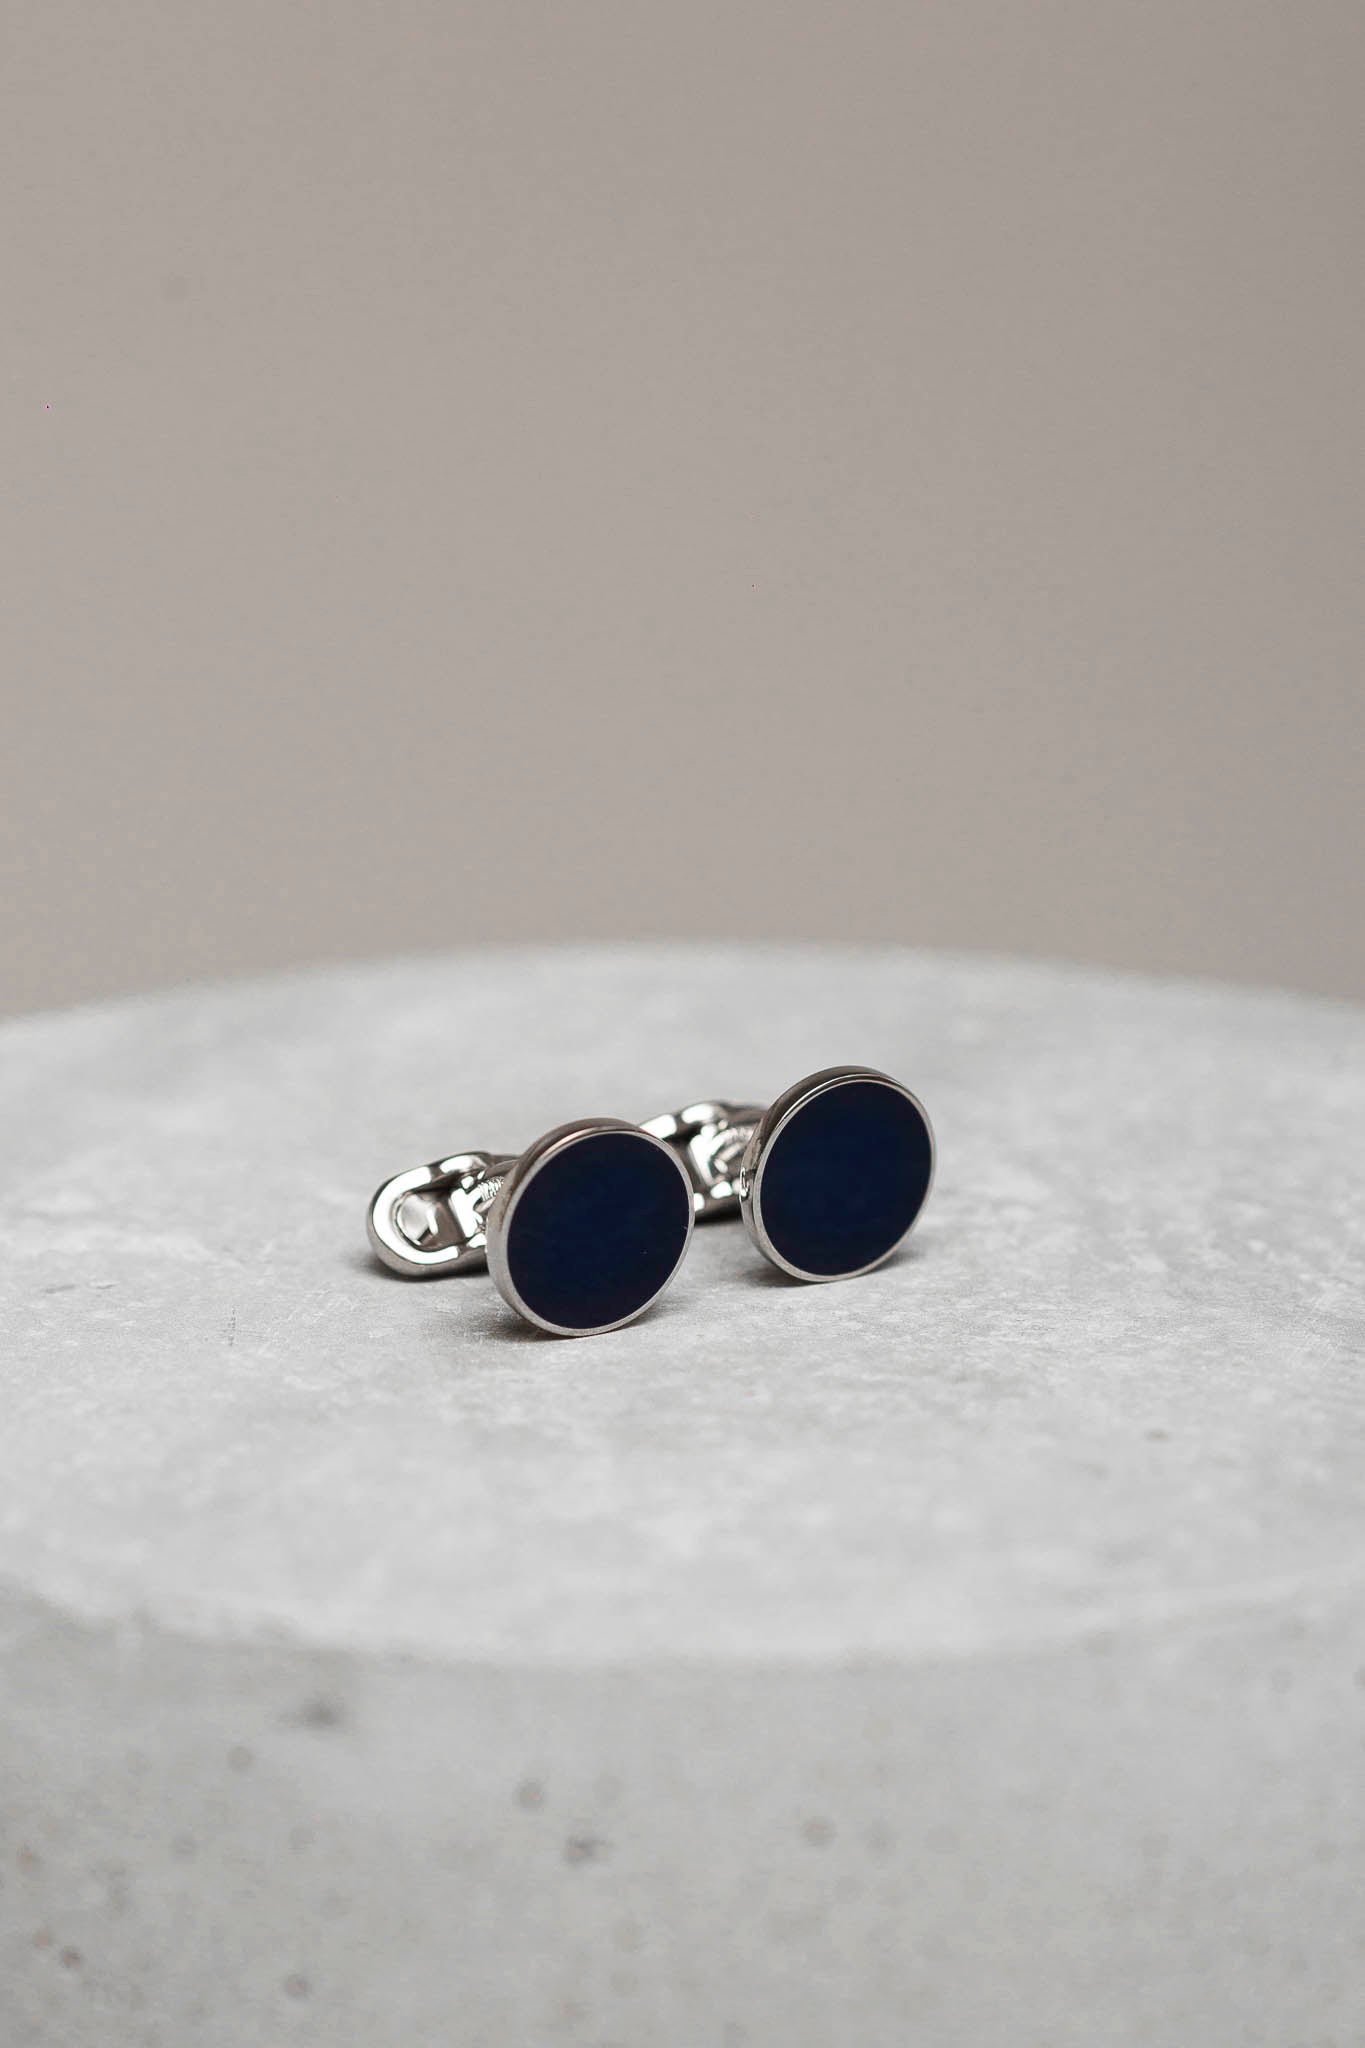 Blue cufflinks - Made in Italy